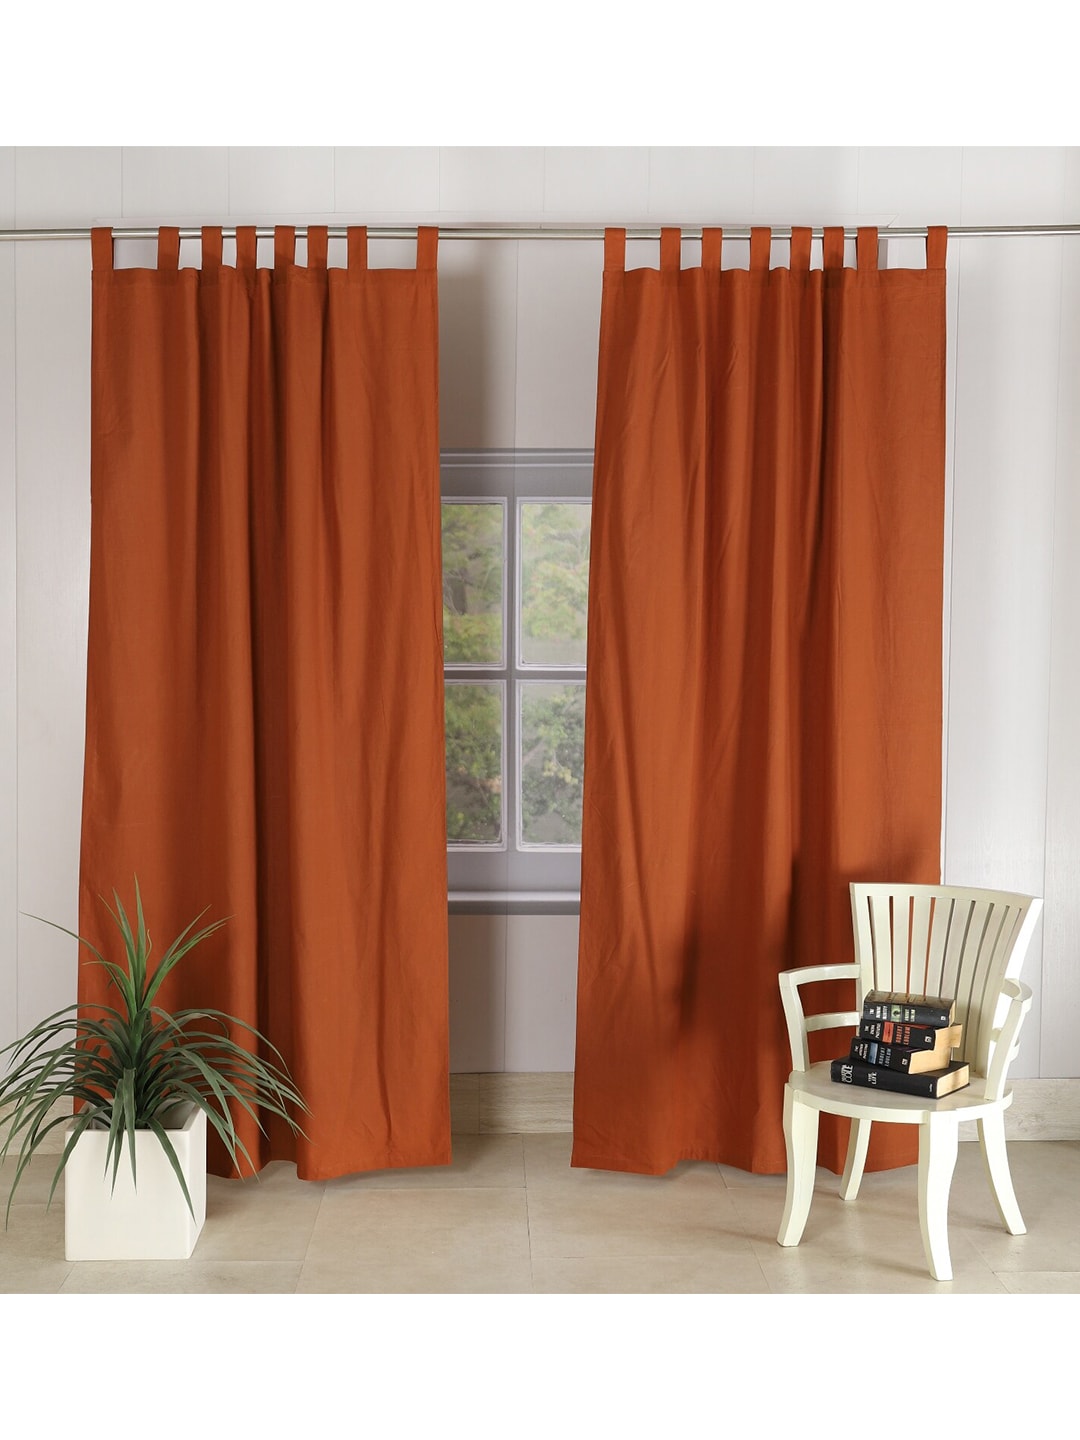 HANDICRAFT PALACE Rust Set of 2 Black Out Door Curtain Price in India